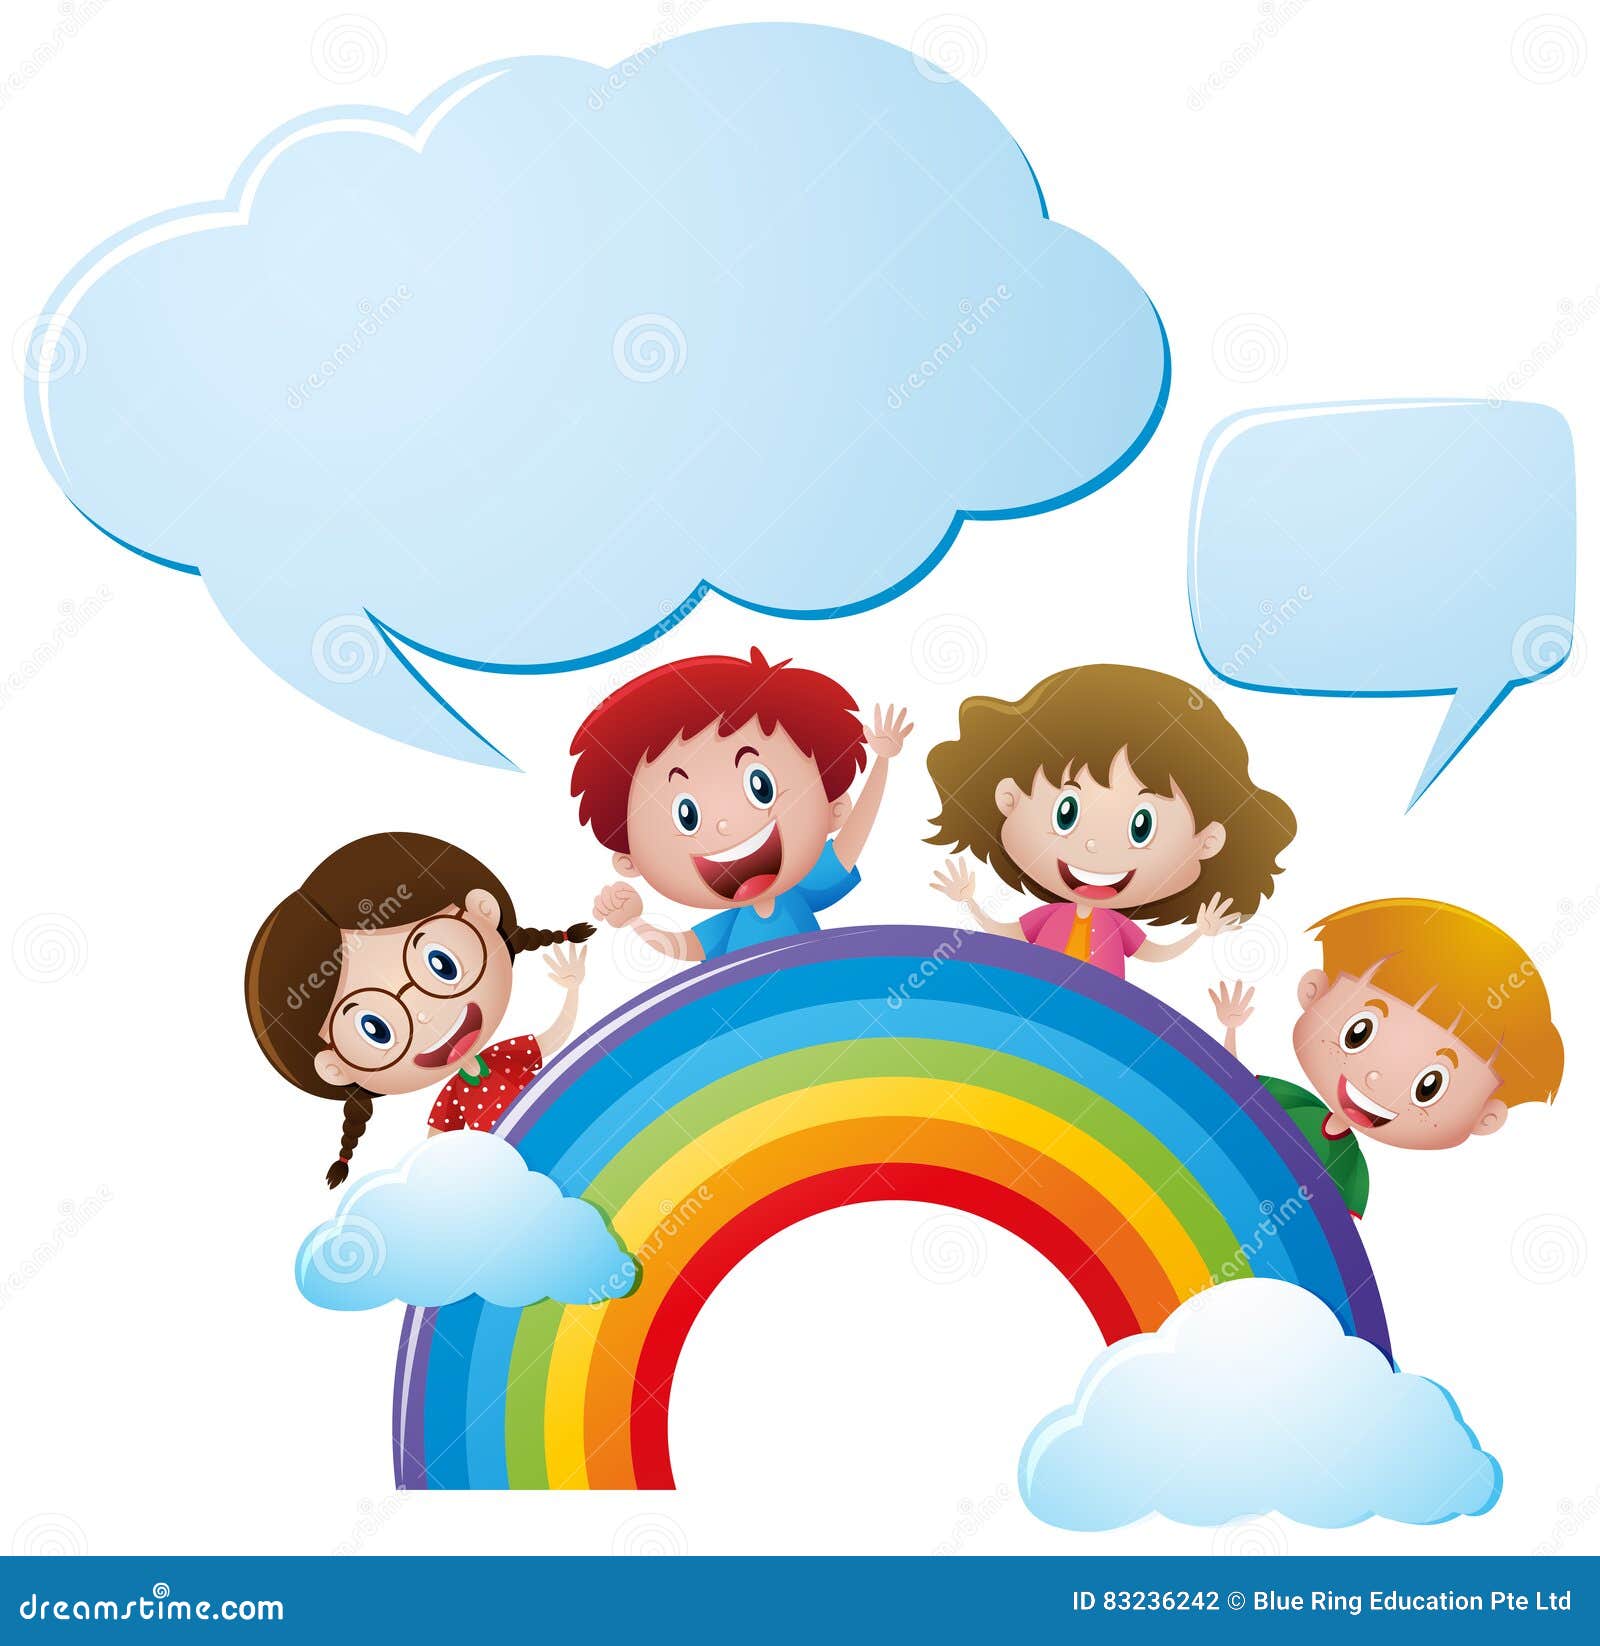 Bubble Templates with Children Over the Rainbow Stock Illustration ...